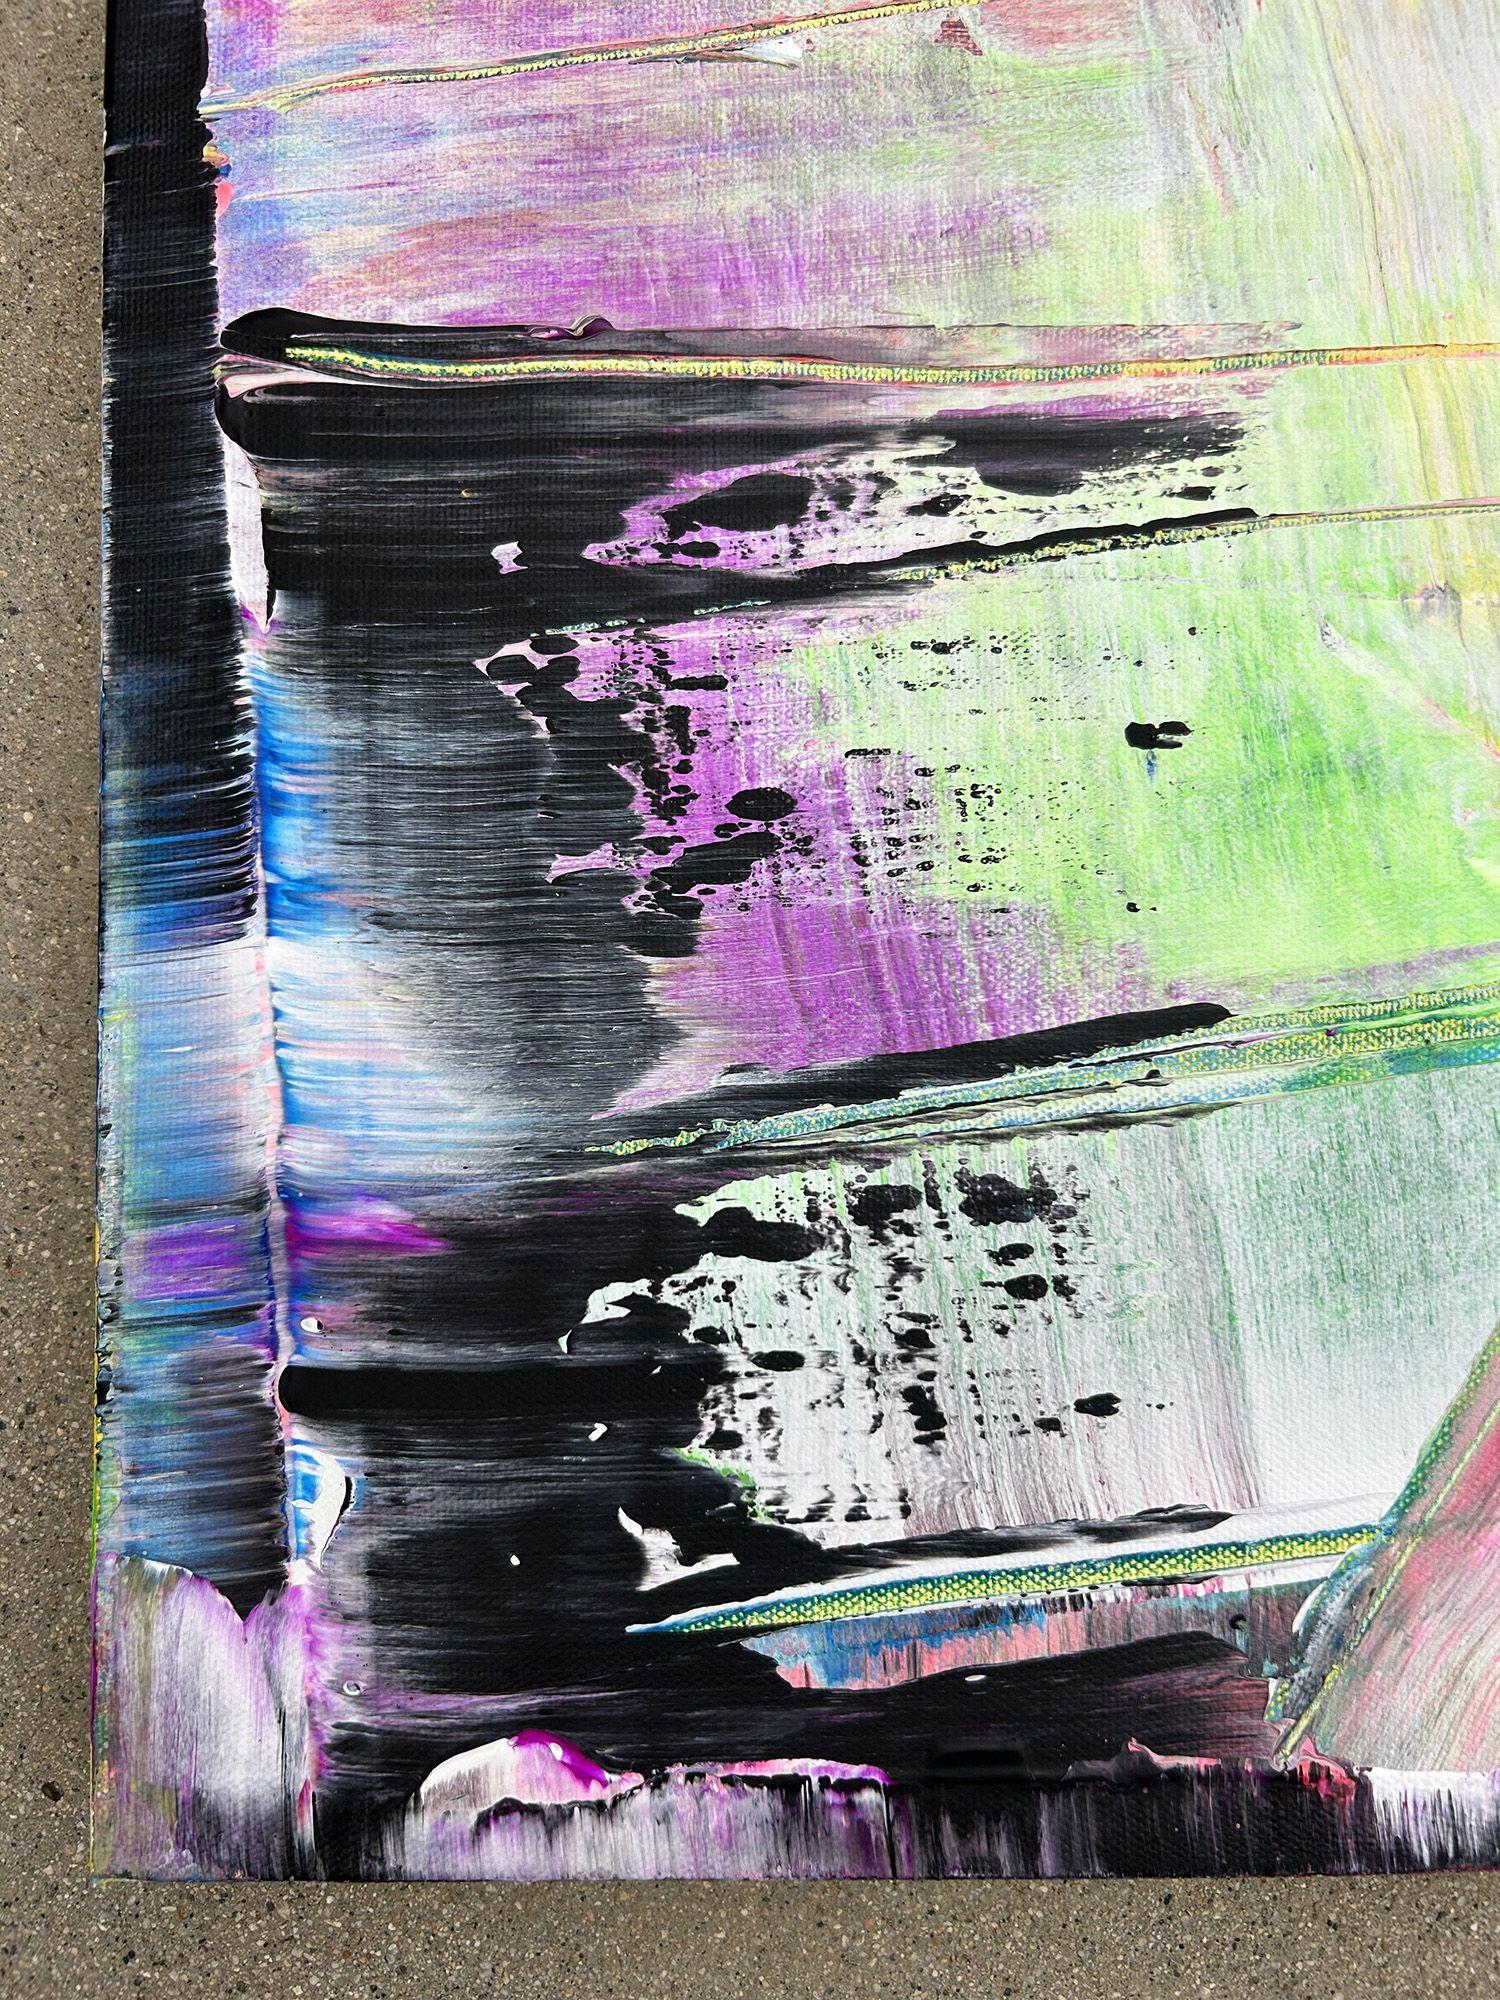 This is a unique large modern PMS abstract acrylic painting that will make a statement in your home or office. This painting is fierce, bold, energetic, and filled with beautiful angst. The colors streak and overlap, while also being contrasted by